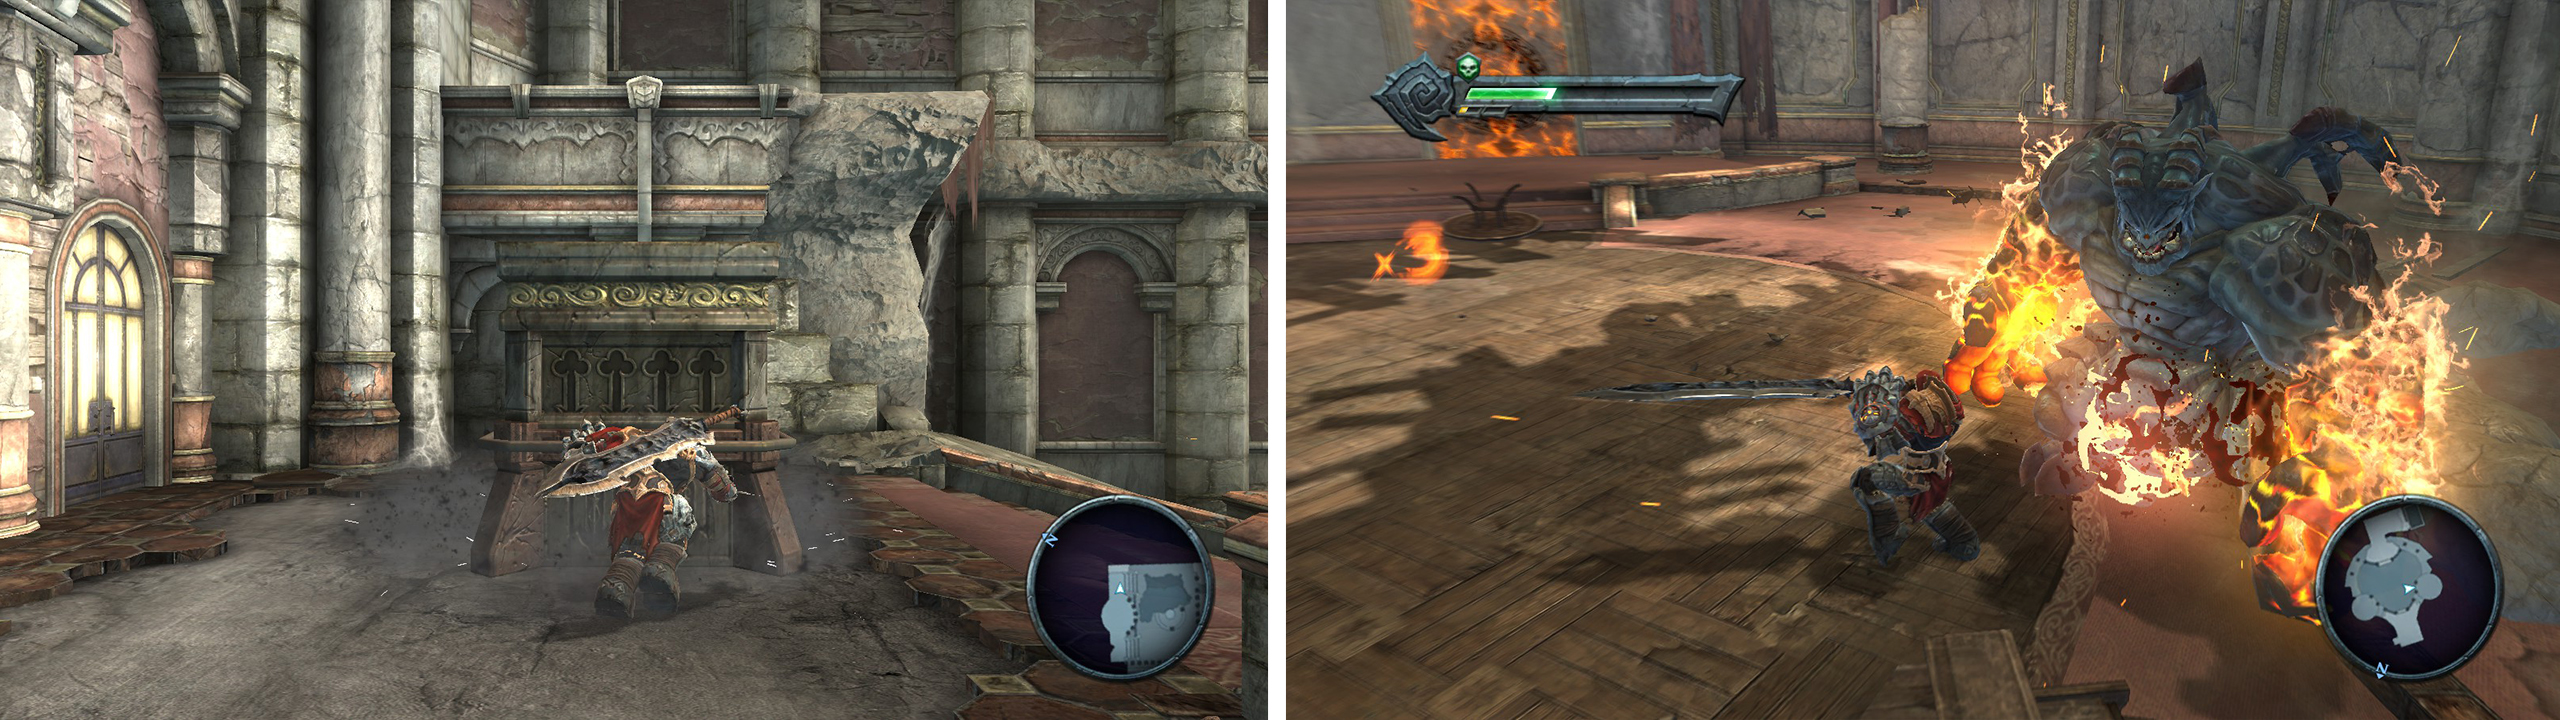 Push the block so that you can access the balcony (left). Keep moving and kill the blue dragon (right).